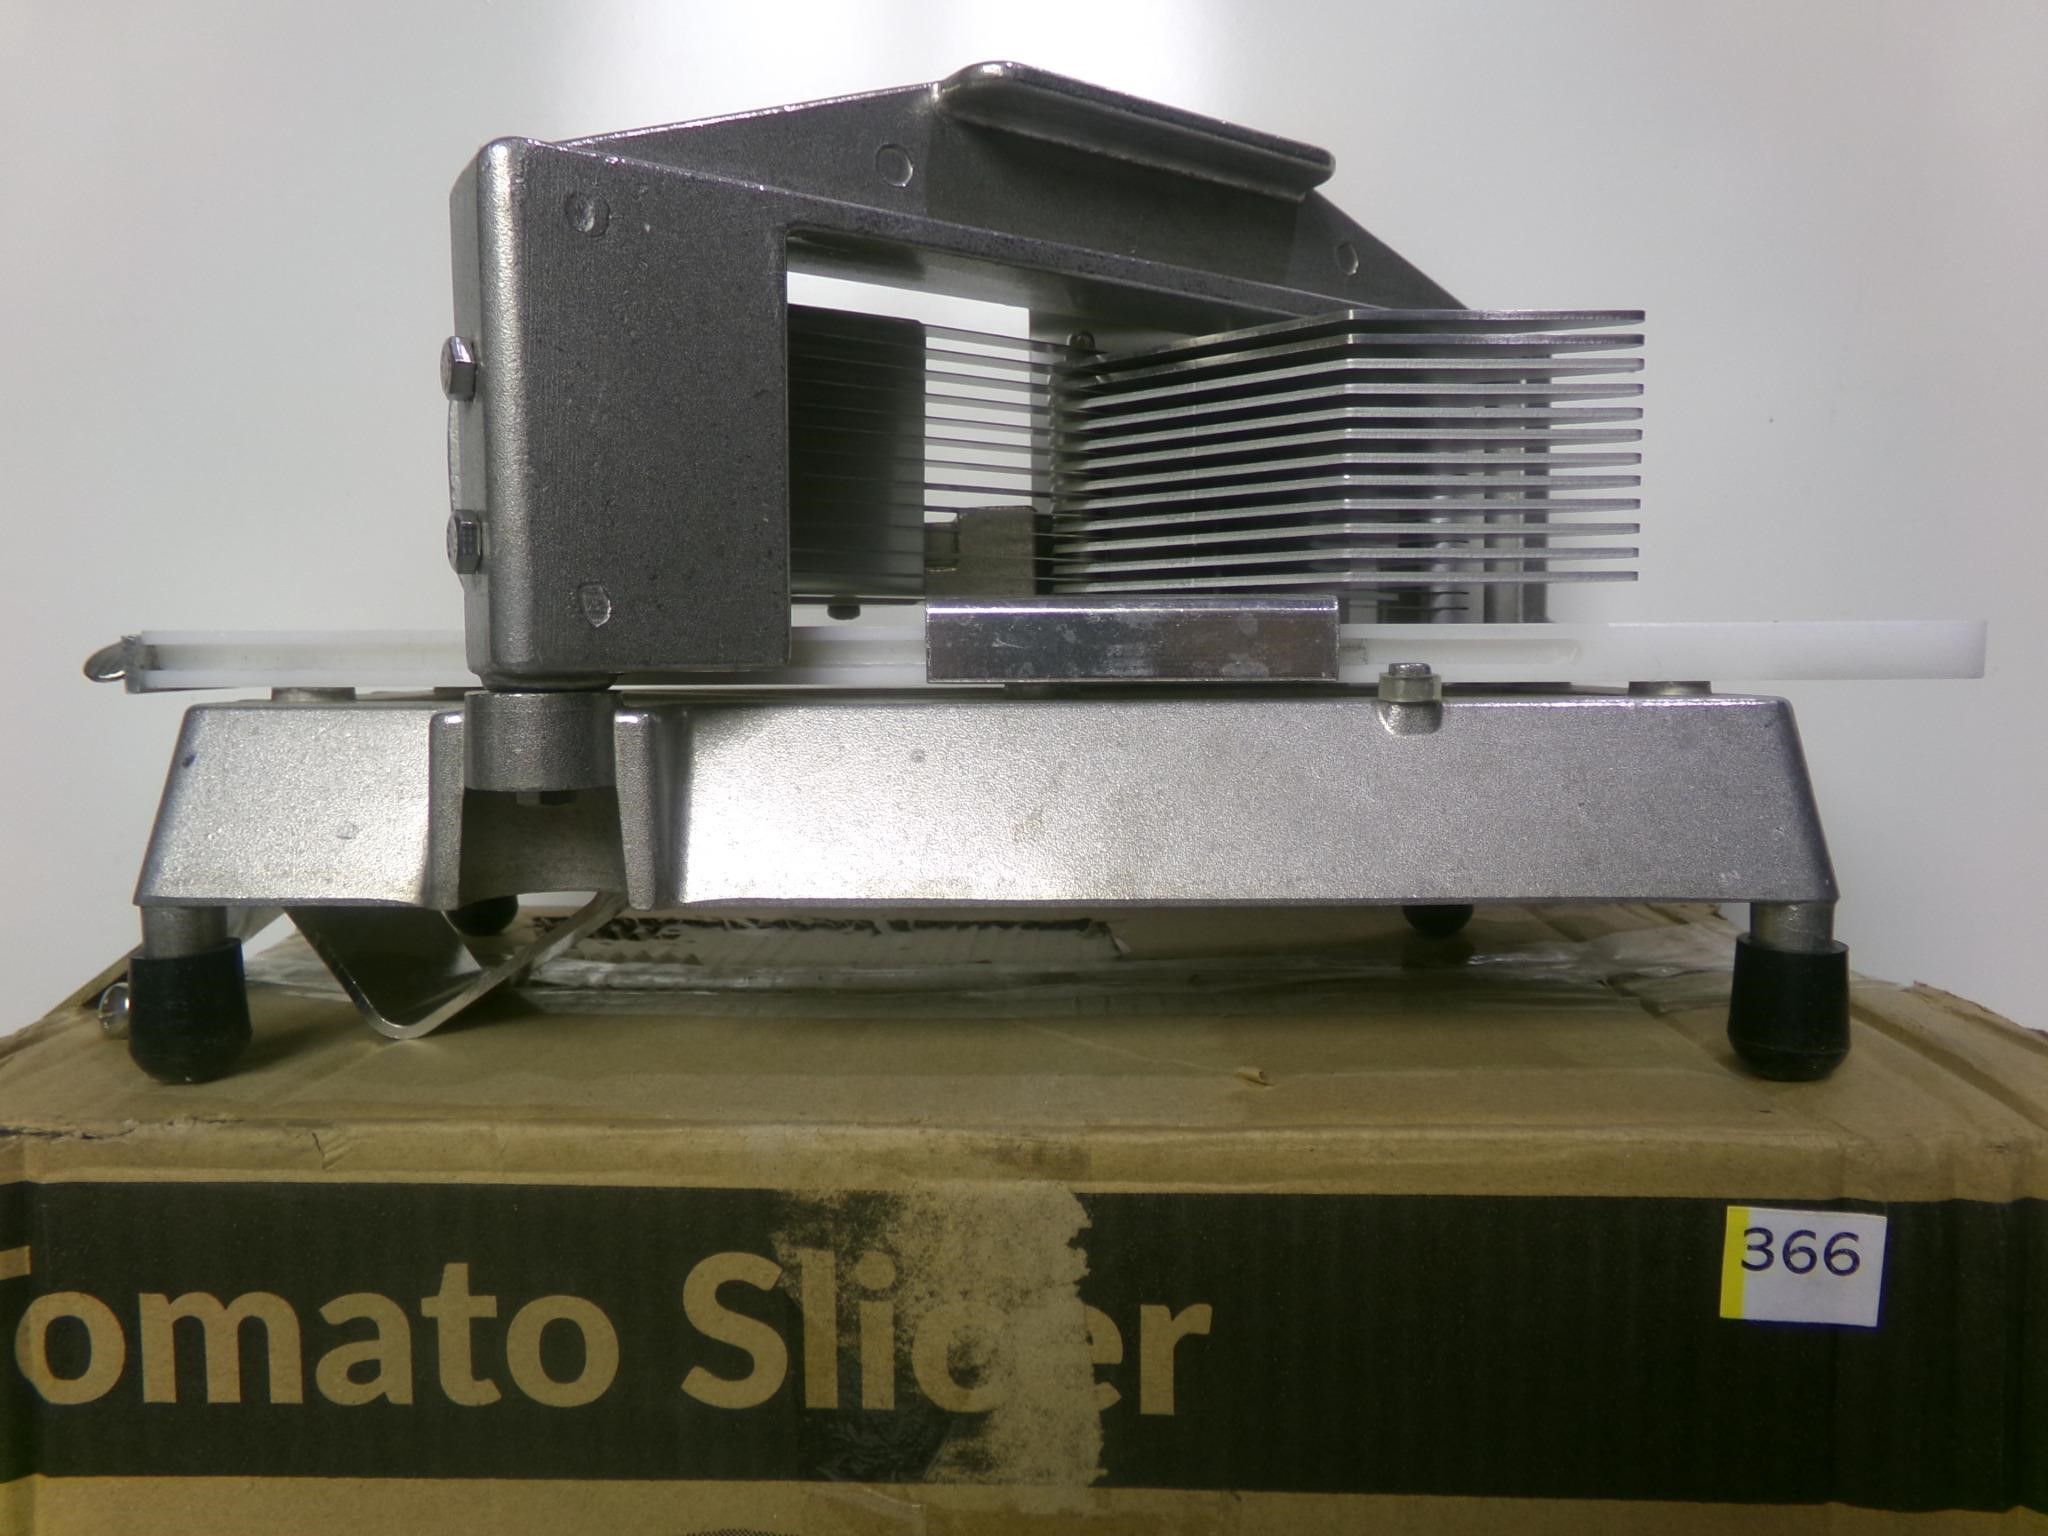 Commercial Tomato Slicer 3/16" and 1/4"